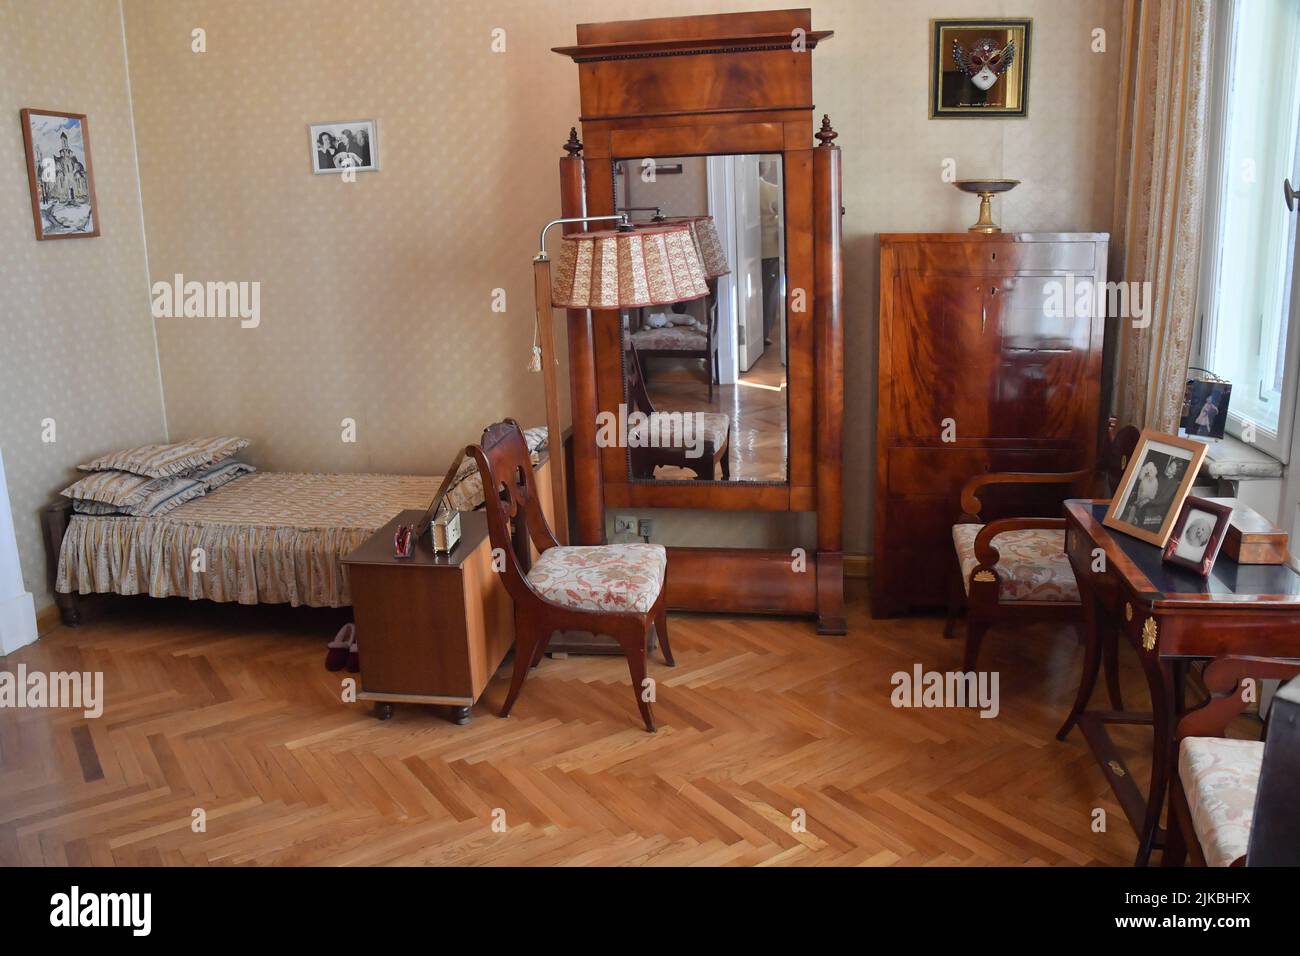 Moscow. The room in the museum apartment of the ballerina Galina Ulanova in a skyscraper on Kotelnicheskaya Embankment. Stock Photo